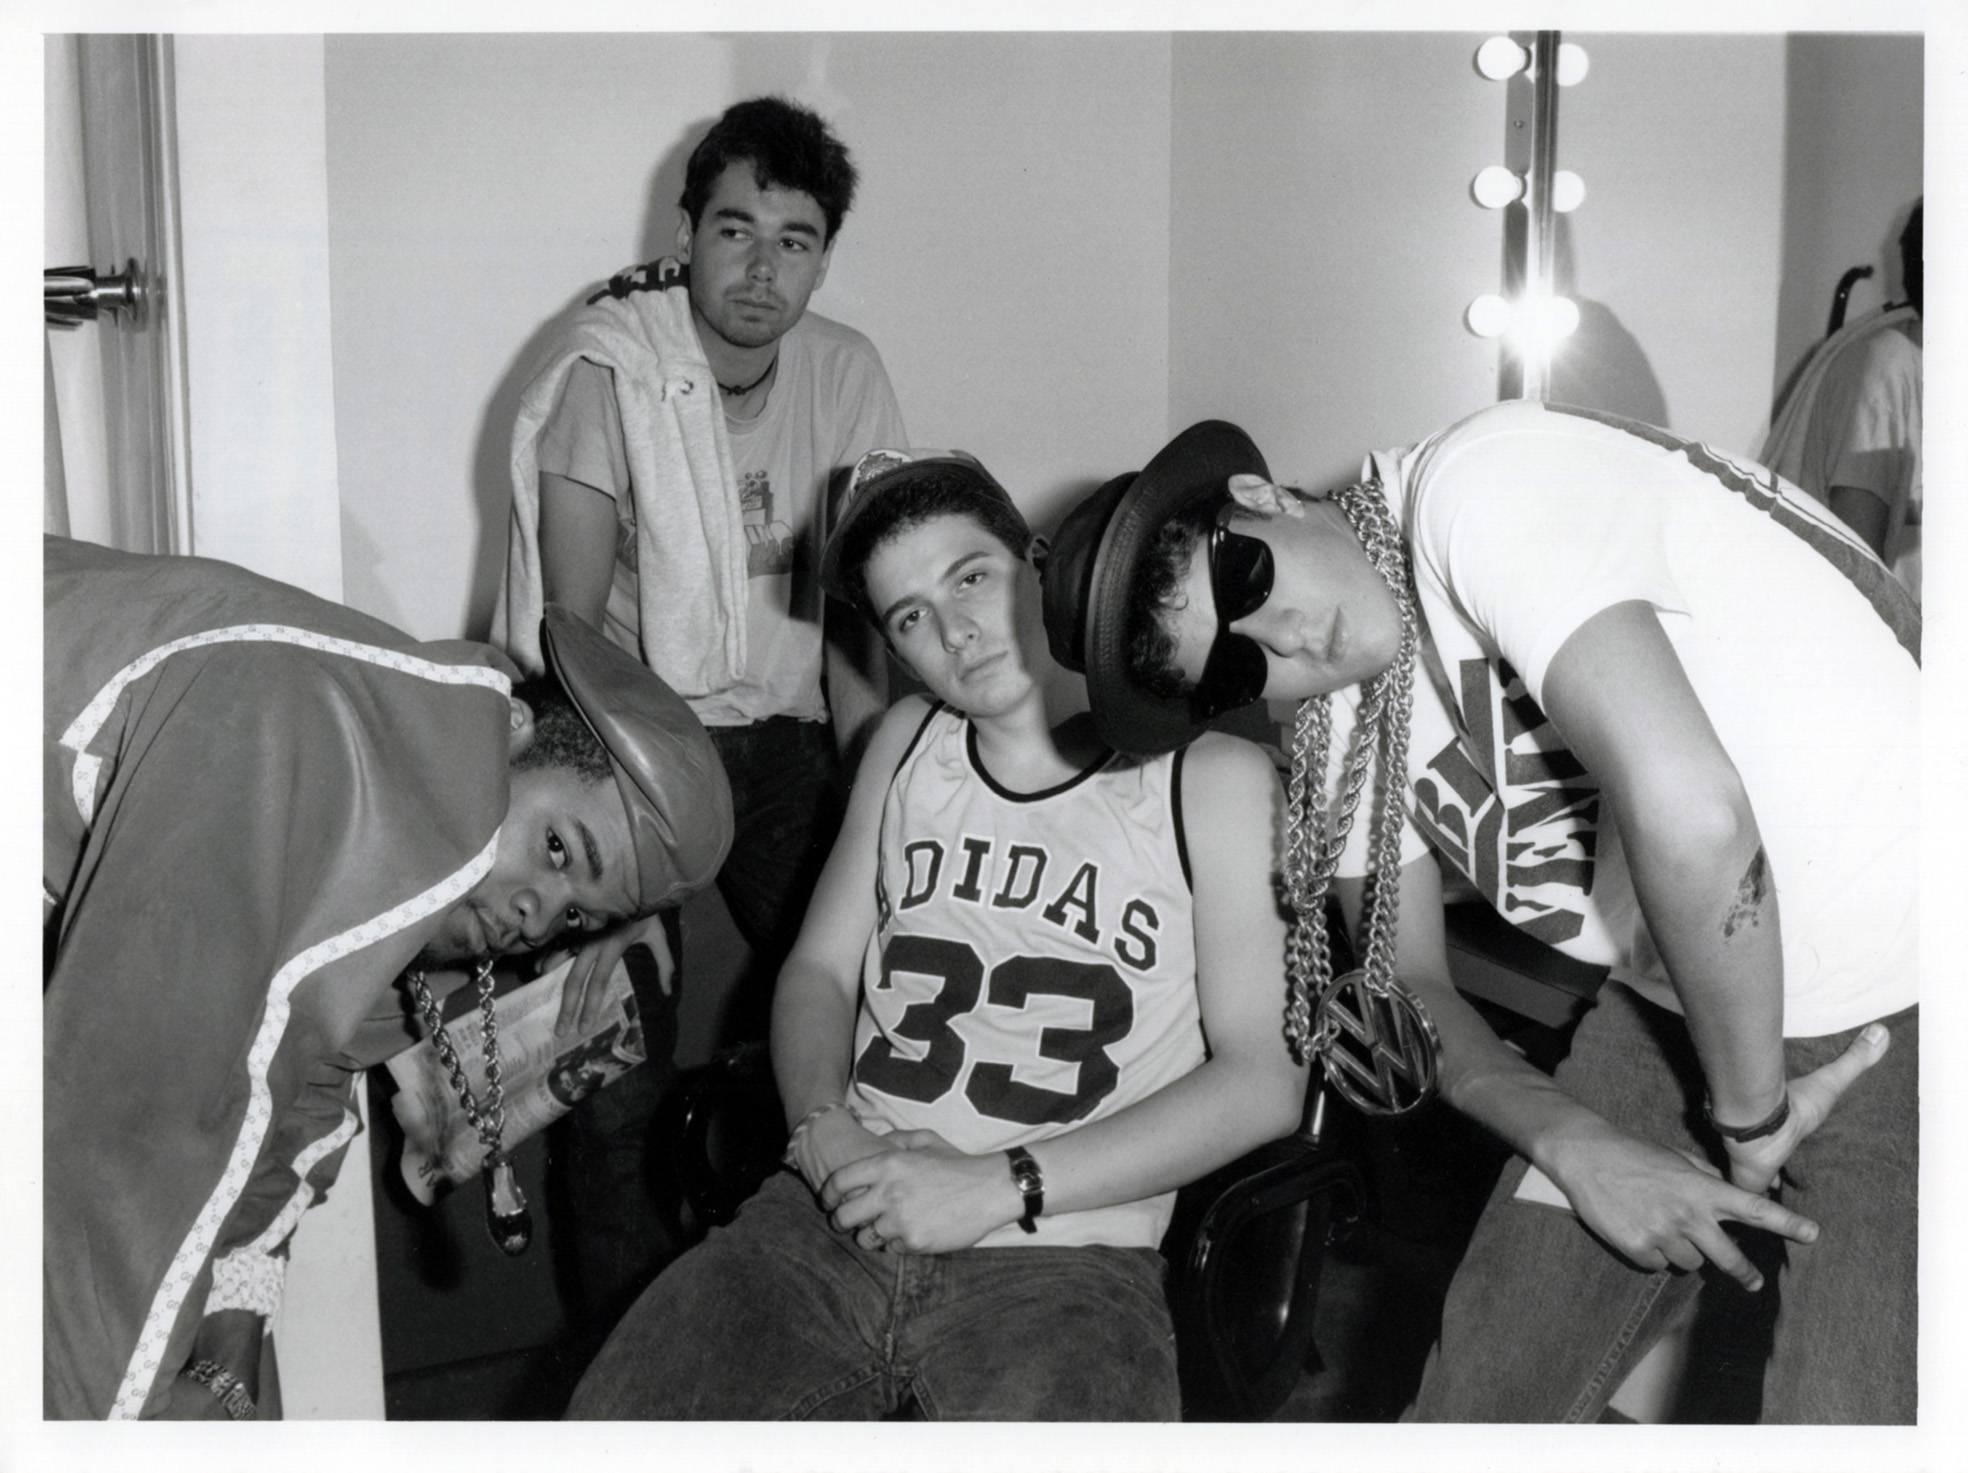 Unknown Black and White Photograph - Vintage Beastie Boys Photograph (1980s)